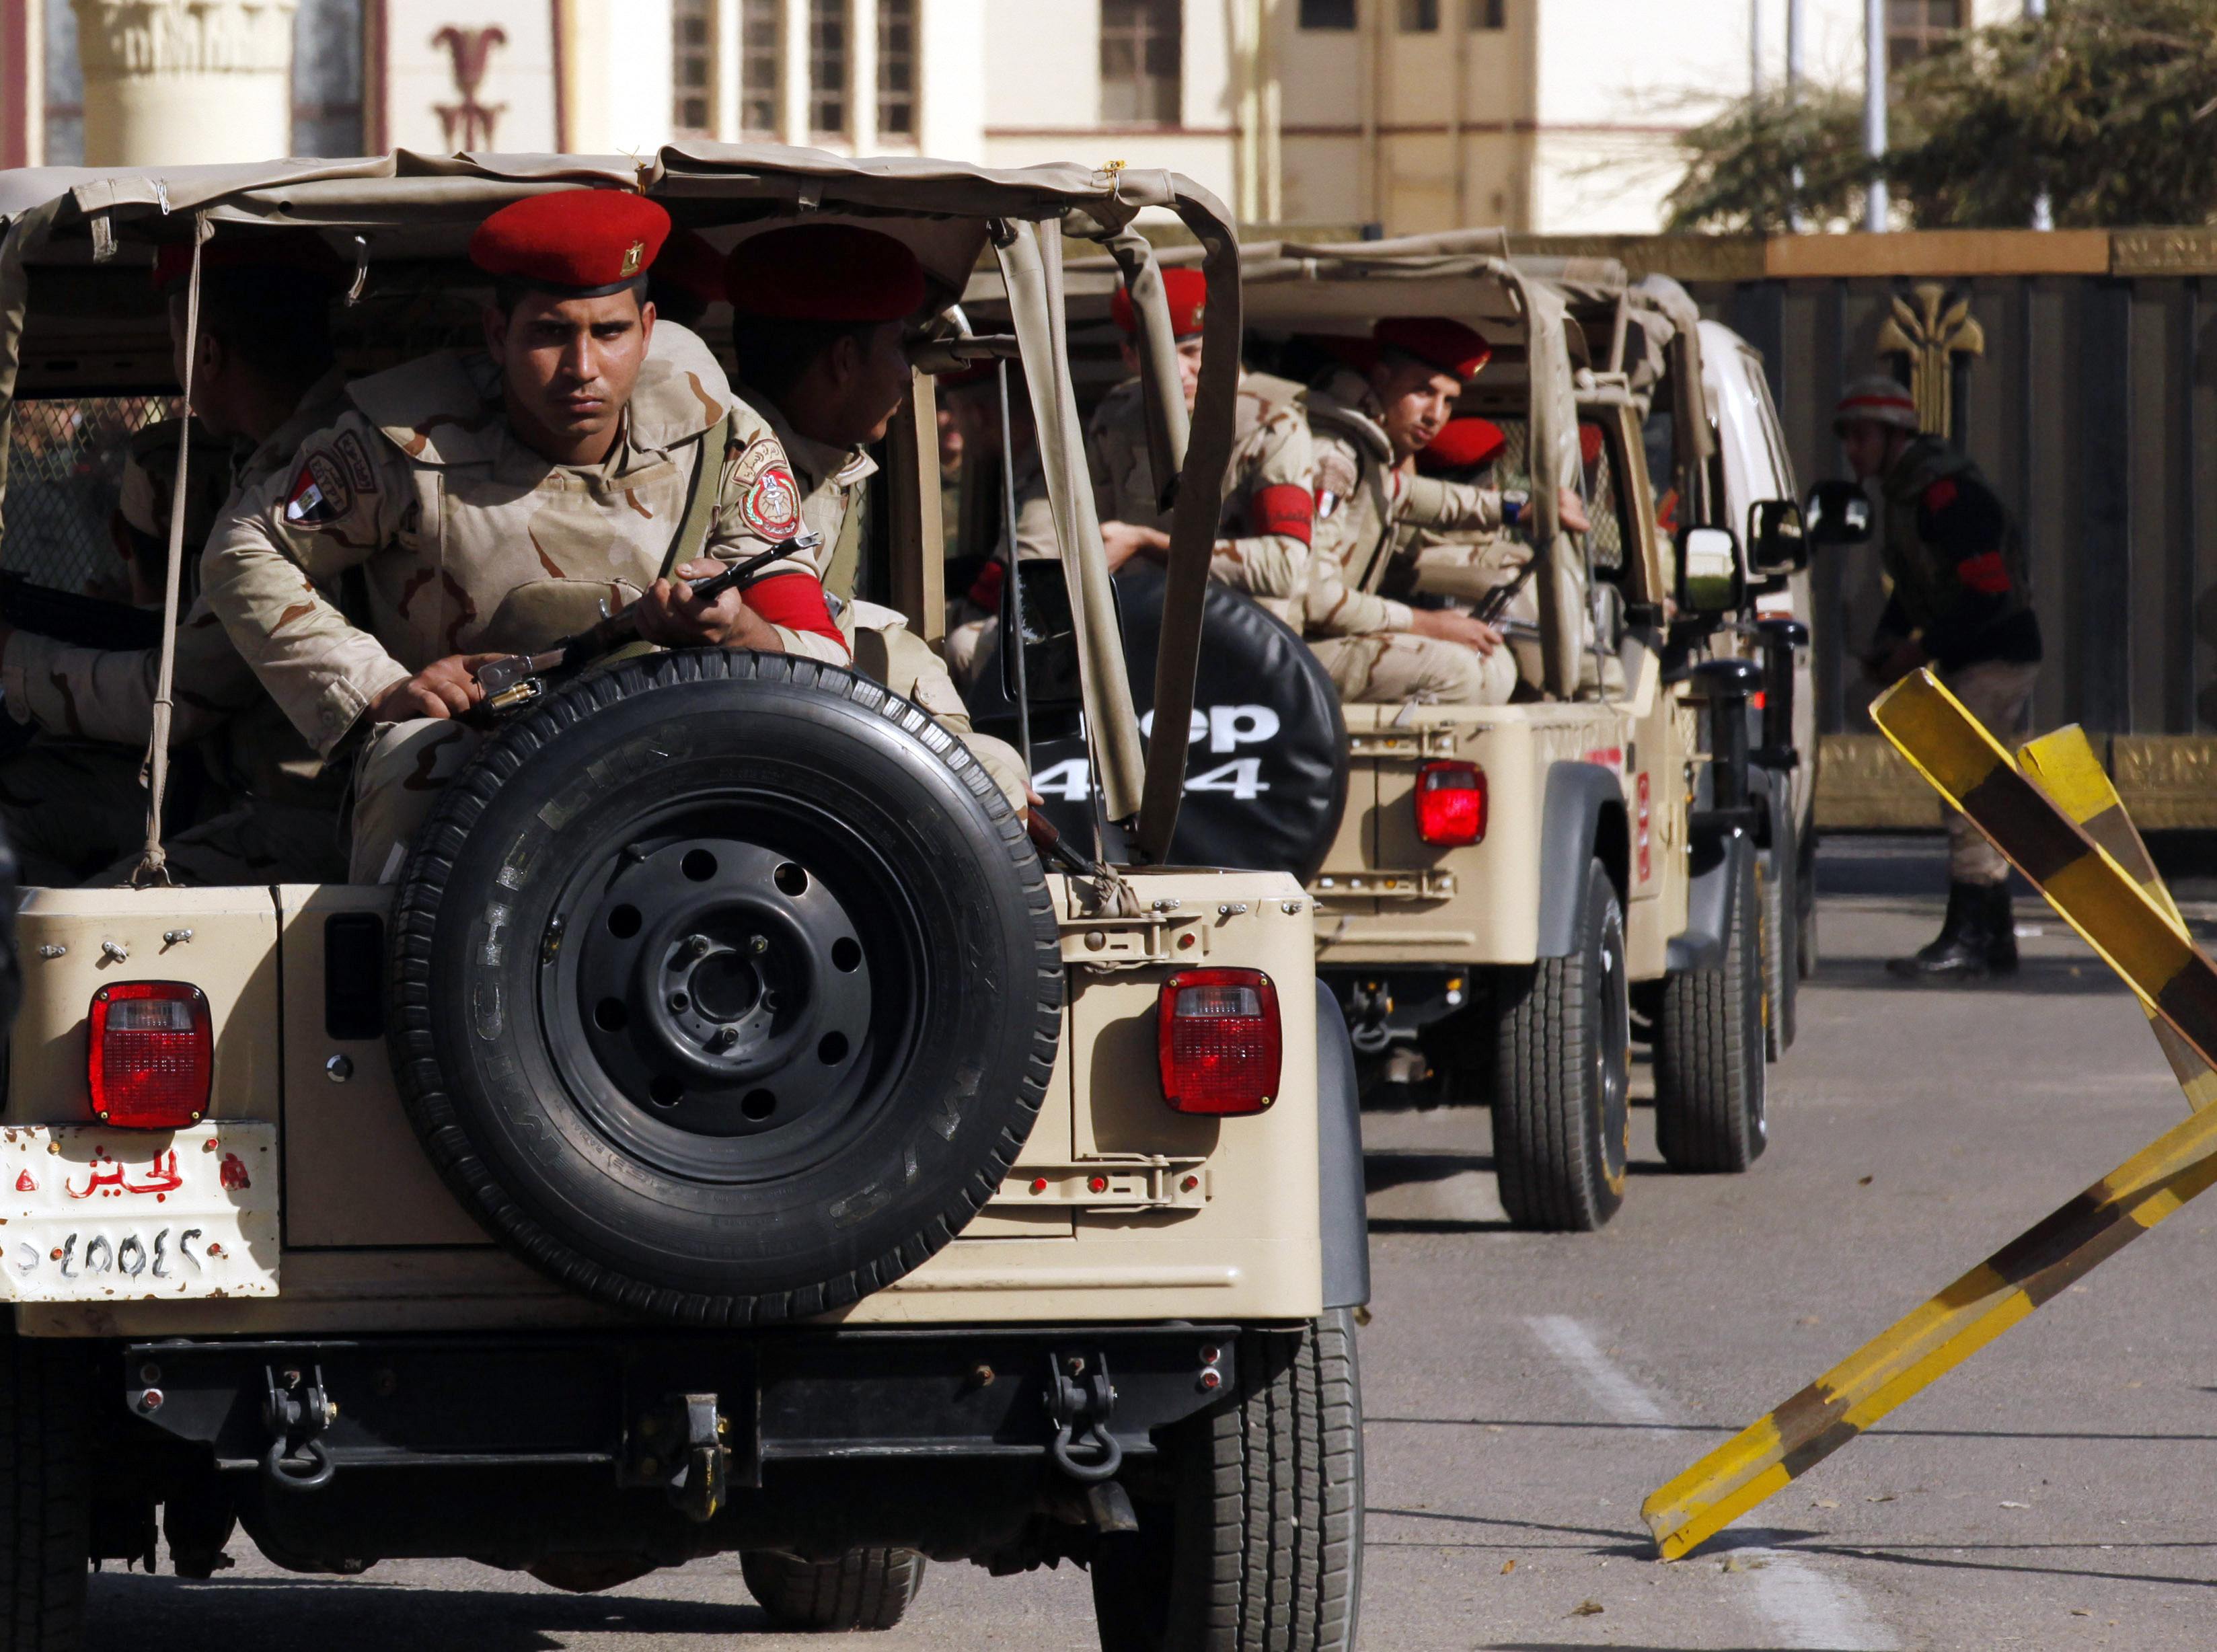 Two conscripts killed, 16 injured in Arish bombing - Interior Ministry